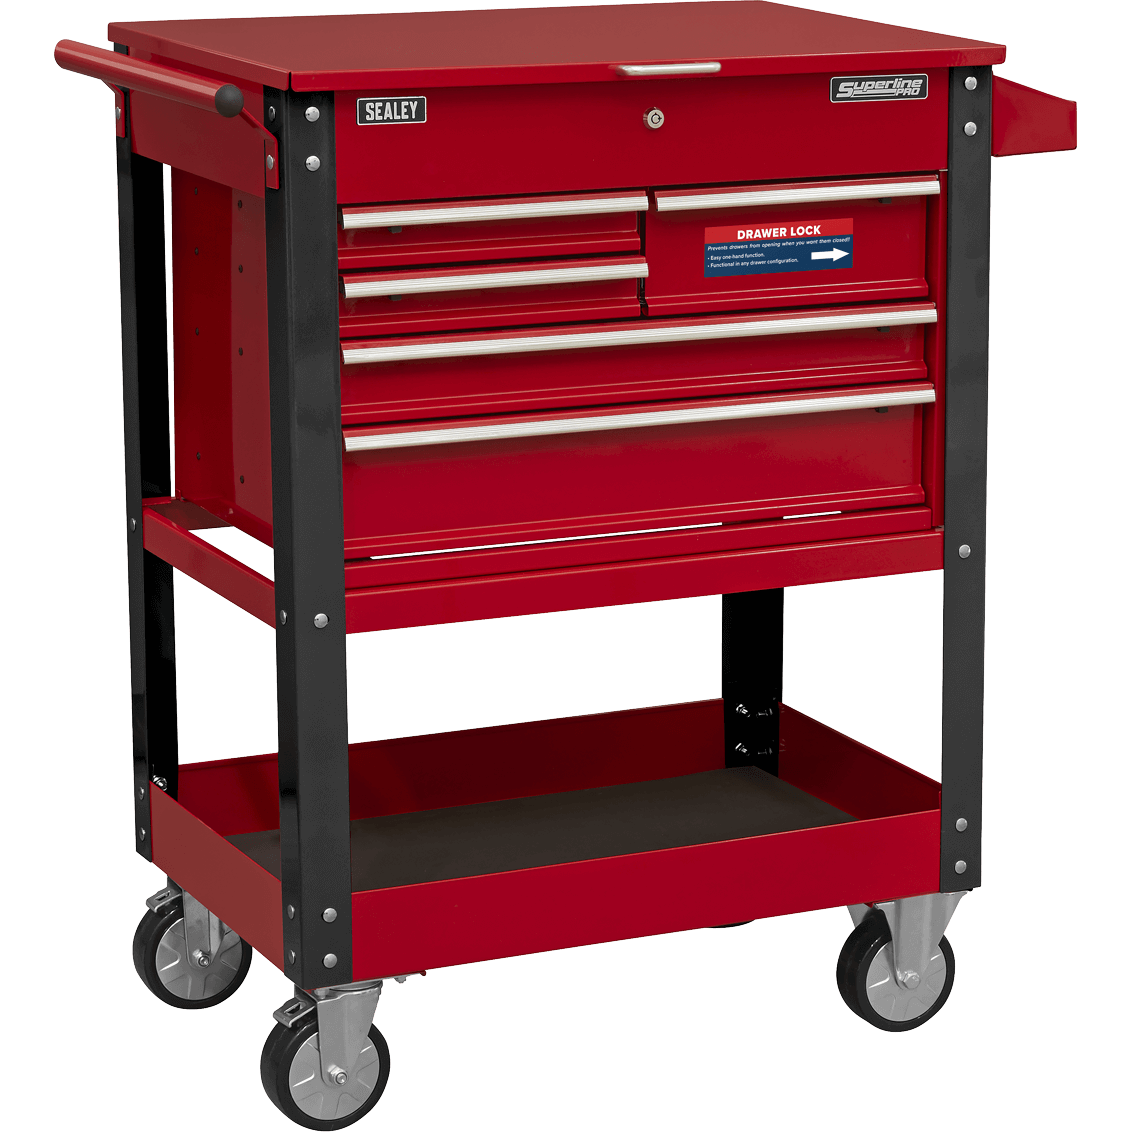 Sealey Heavy Duty 5 Drawer Tool and Parts Trolley Red